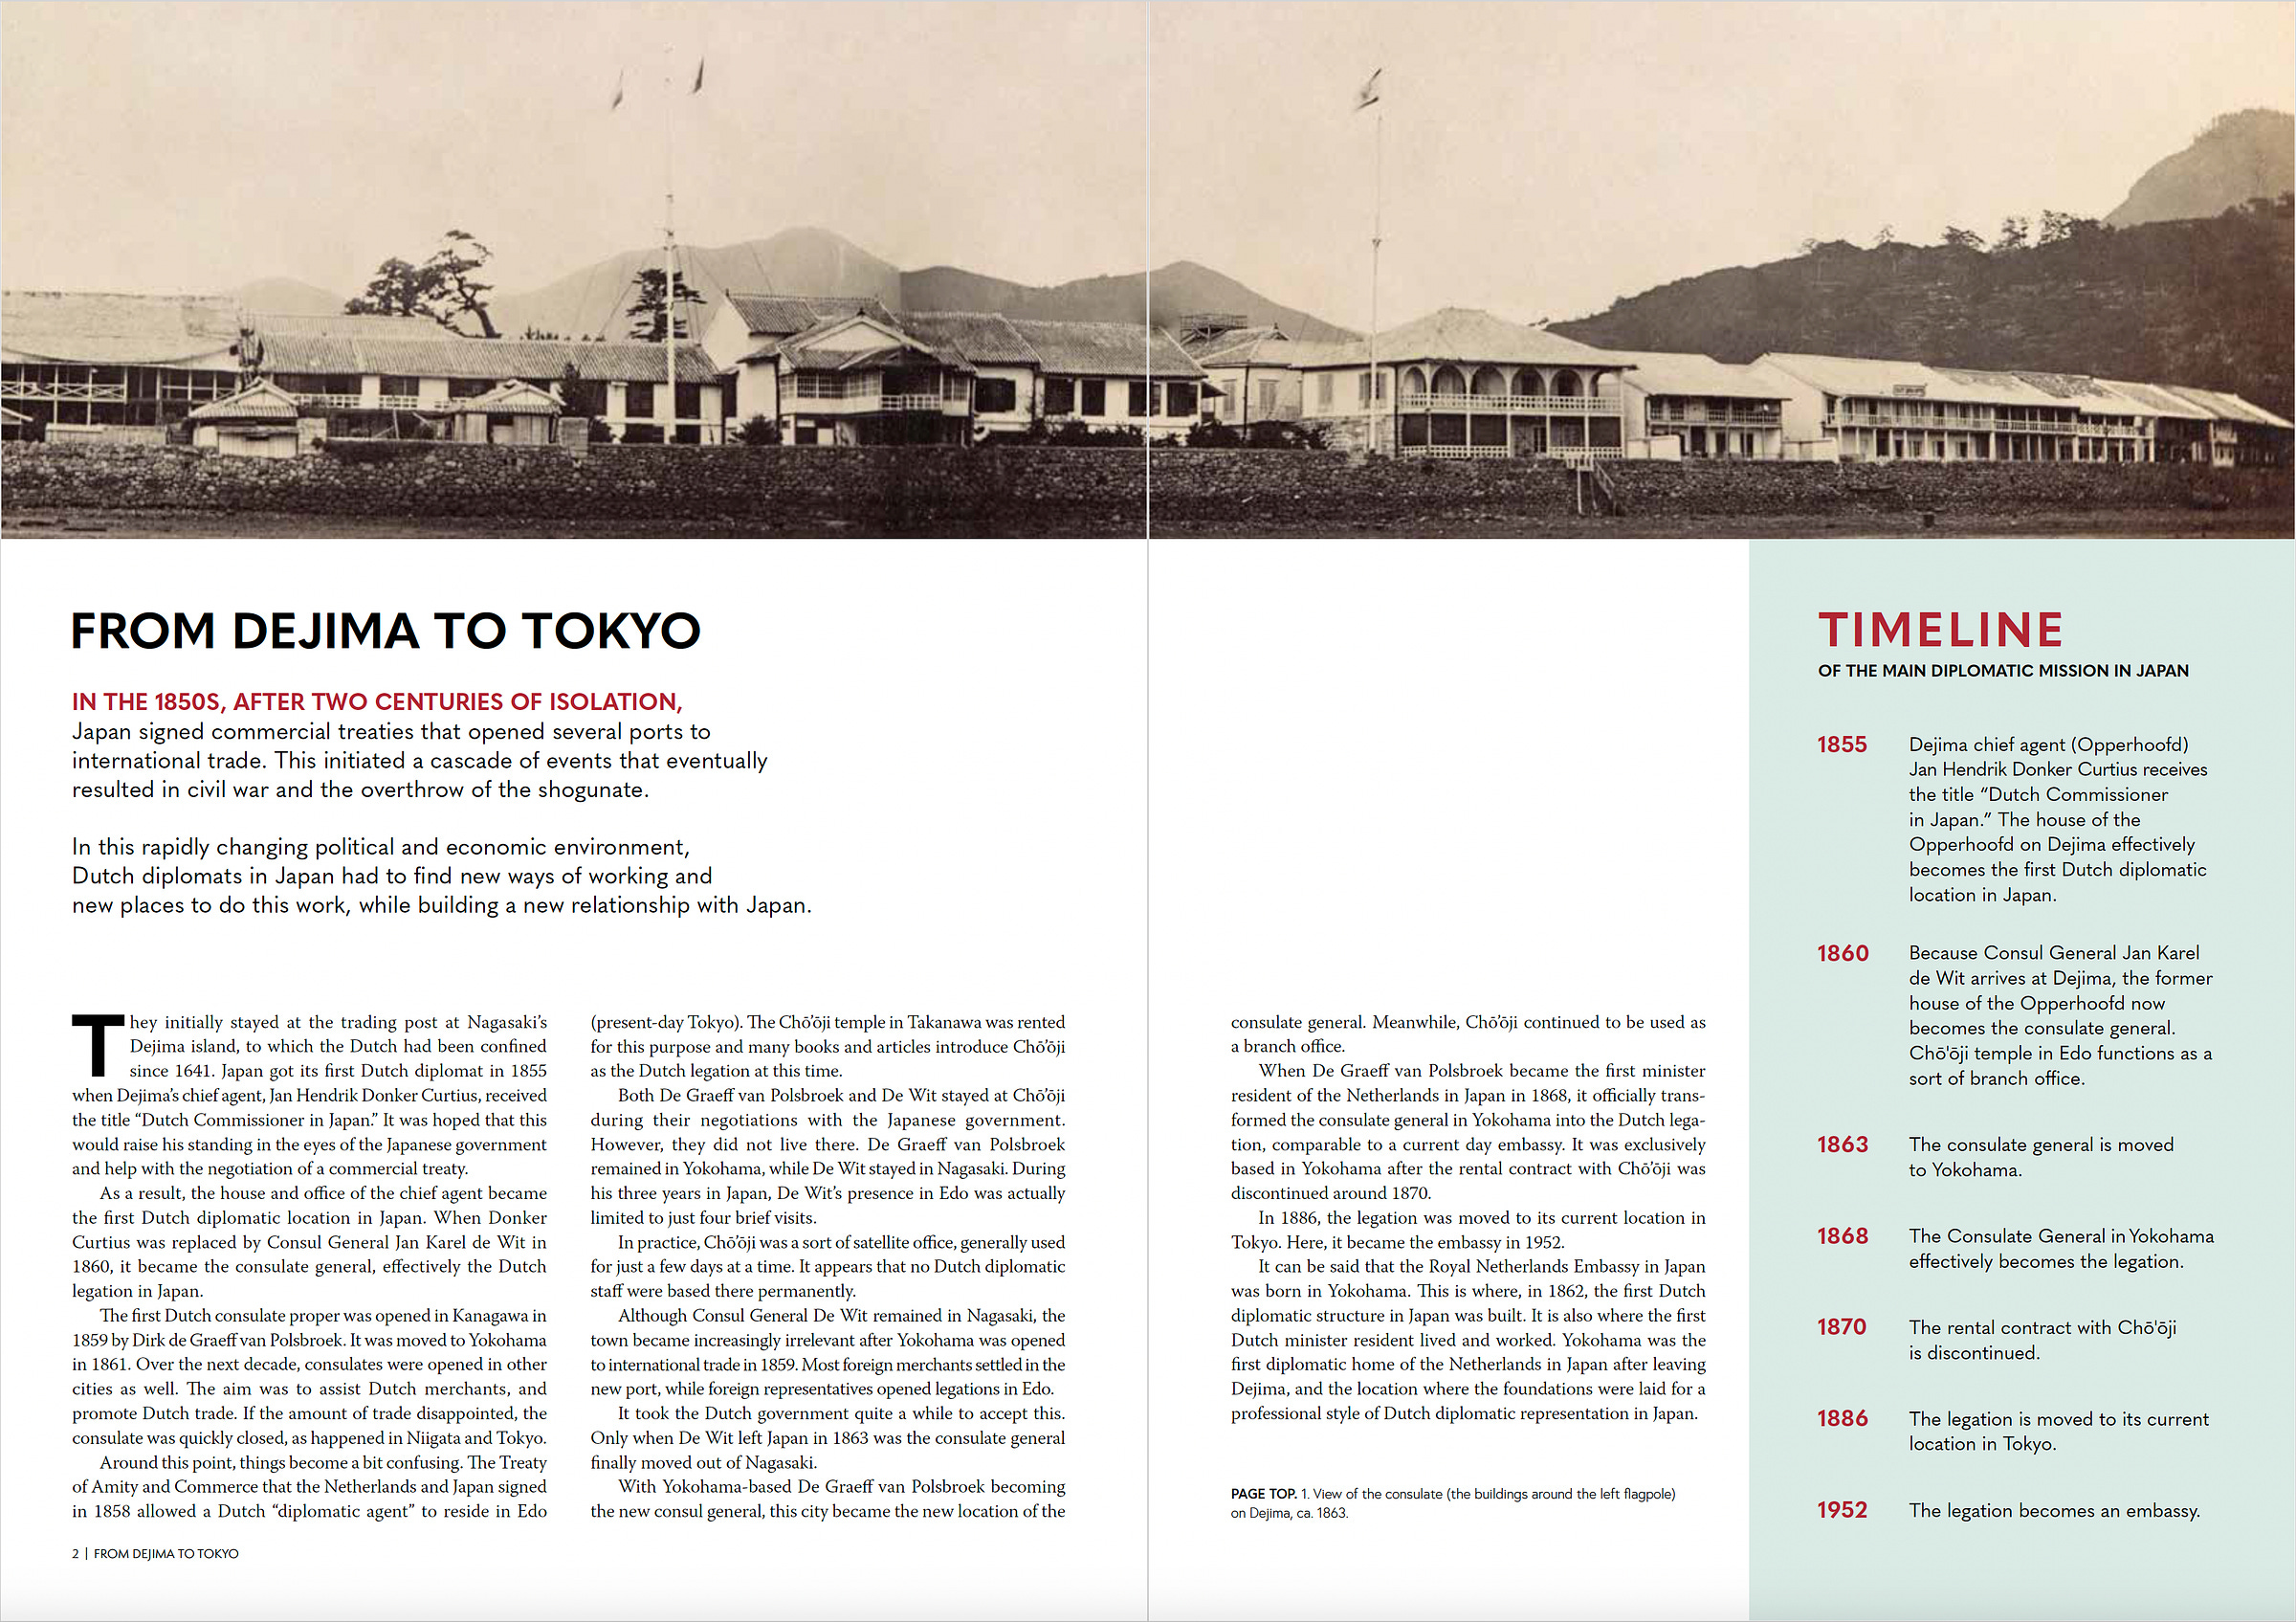 From Dejima to Tokyo. Pages 2 and 3.